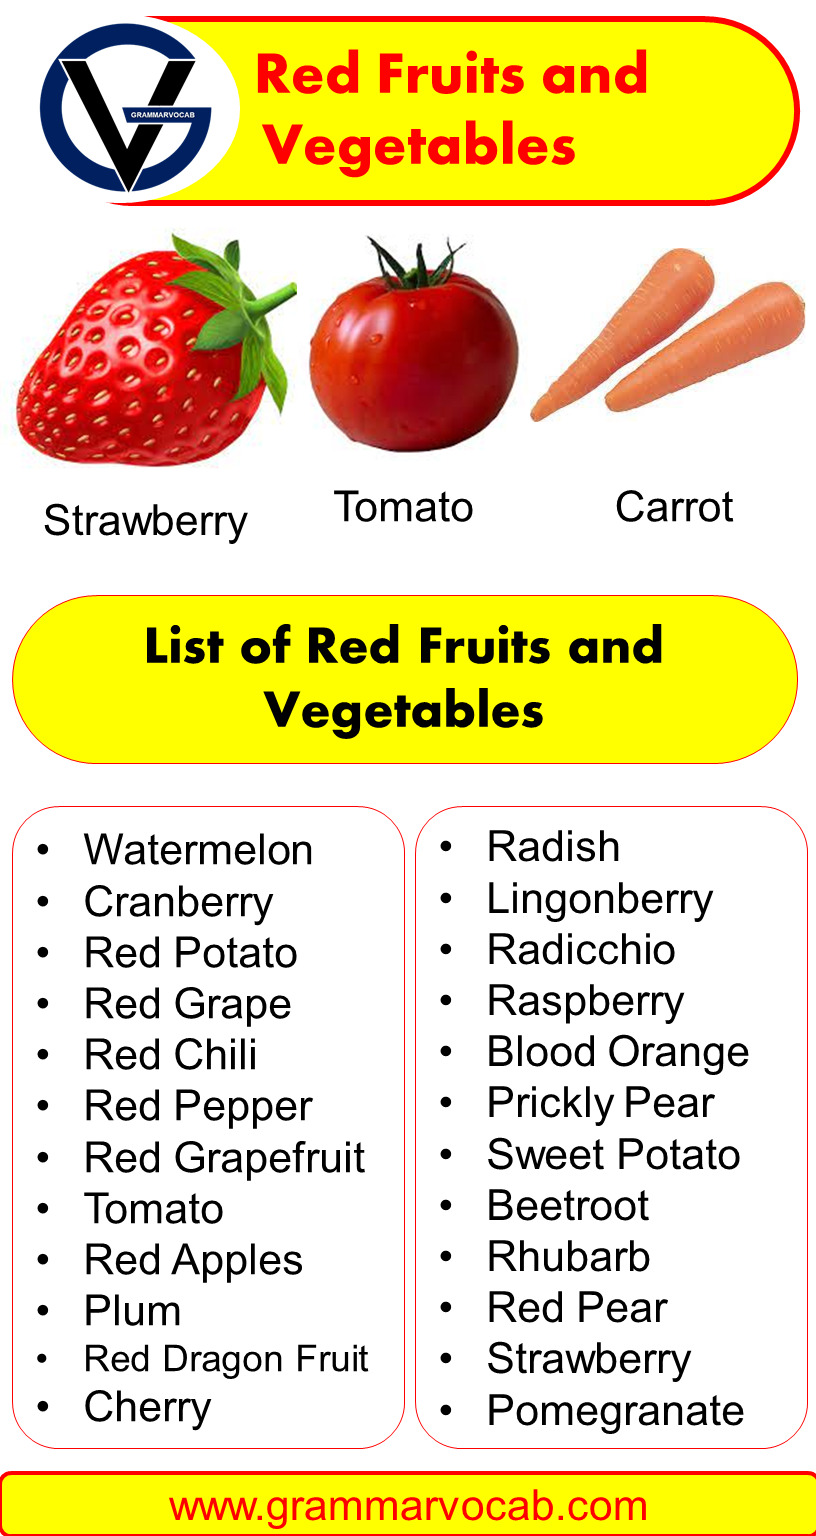 List of Red Fruits and Vegetables